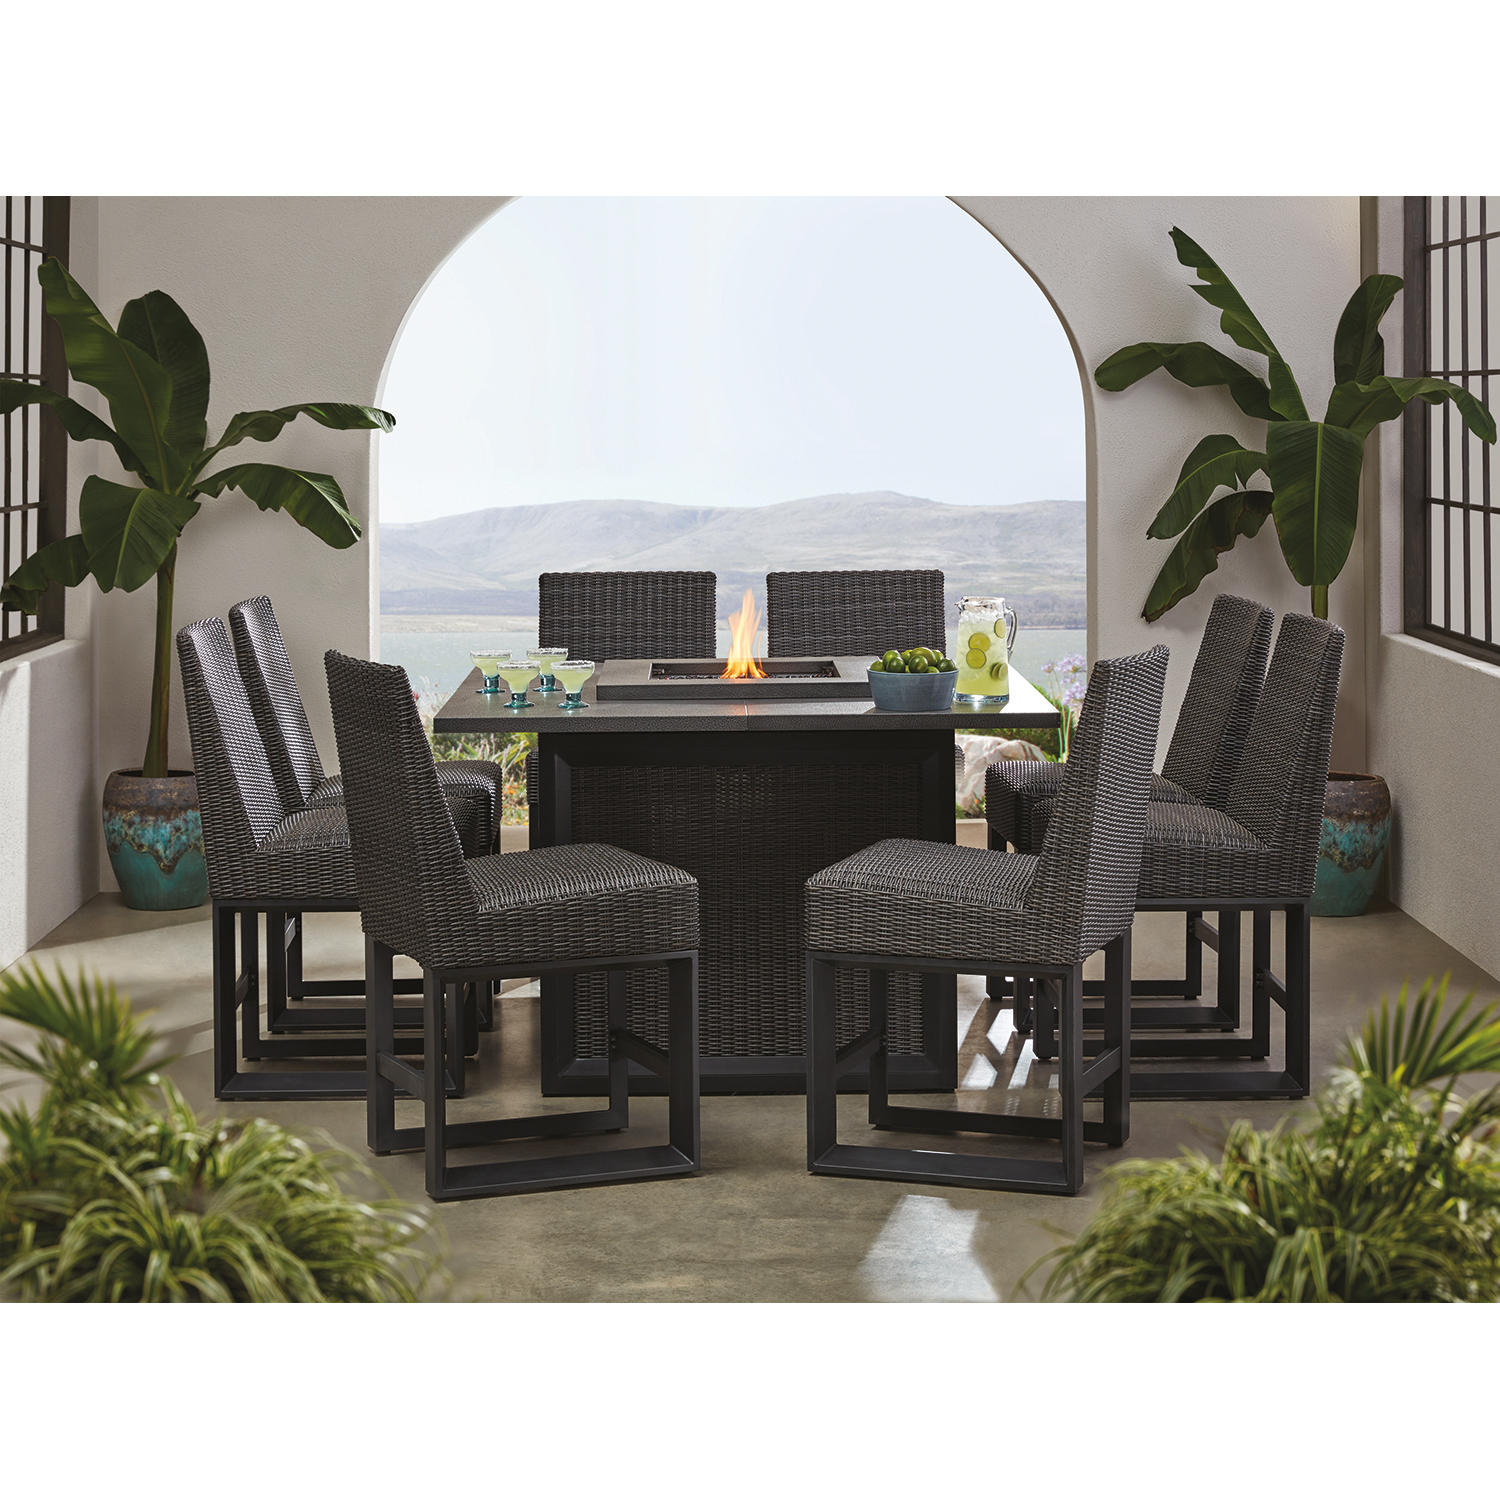 Member’s Mark Adler 9-Piece Counter Height Patio Dining Set with Fire Pit